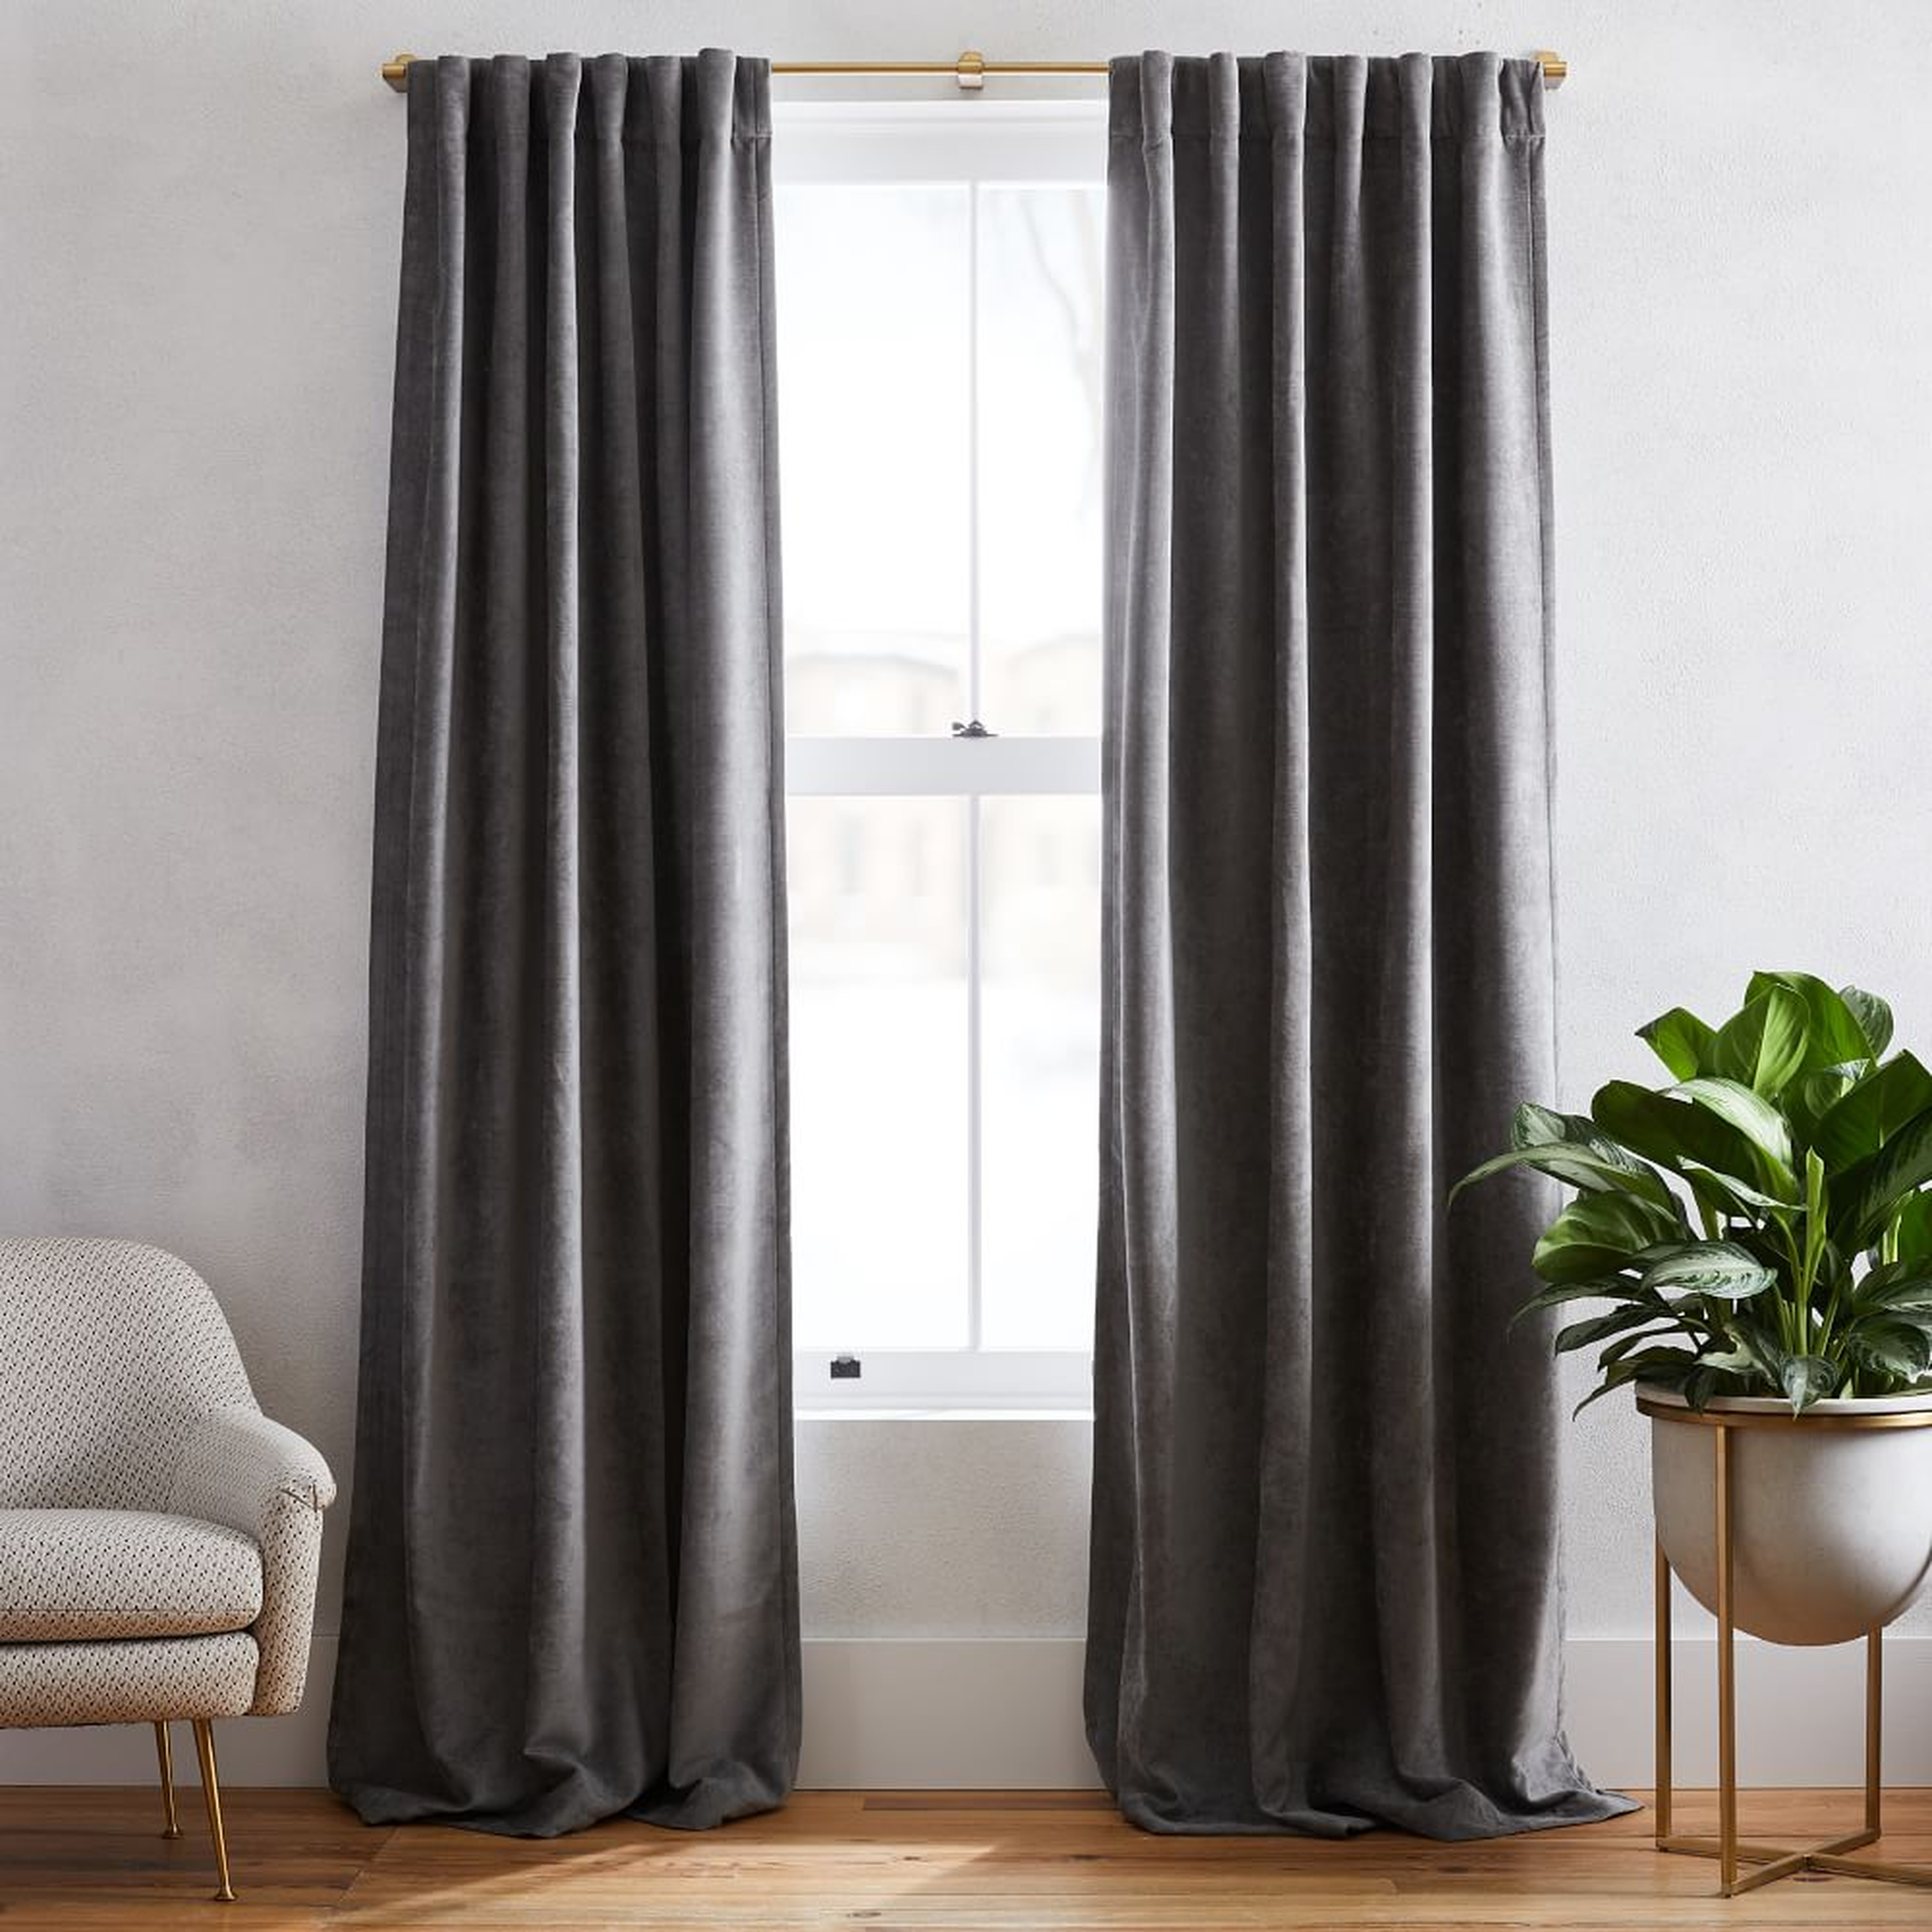 Worn Velvet Curtain with Cotton Lining, Metal, 48"x108", Set of 2 - West Elm